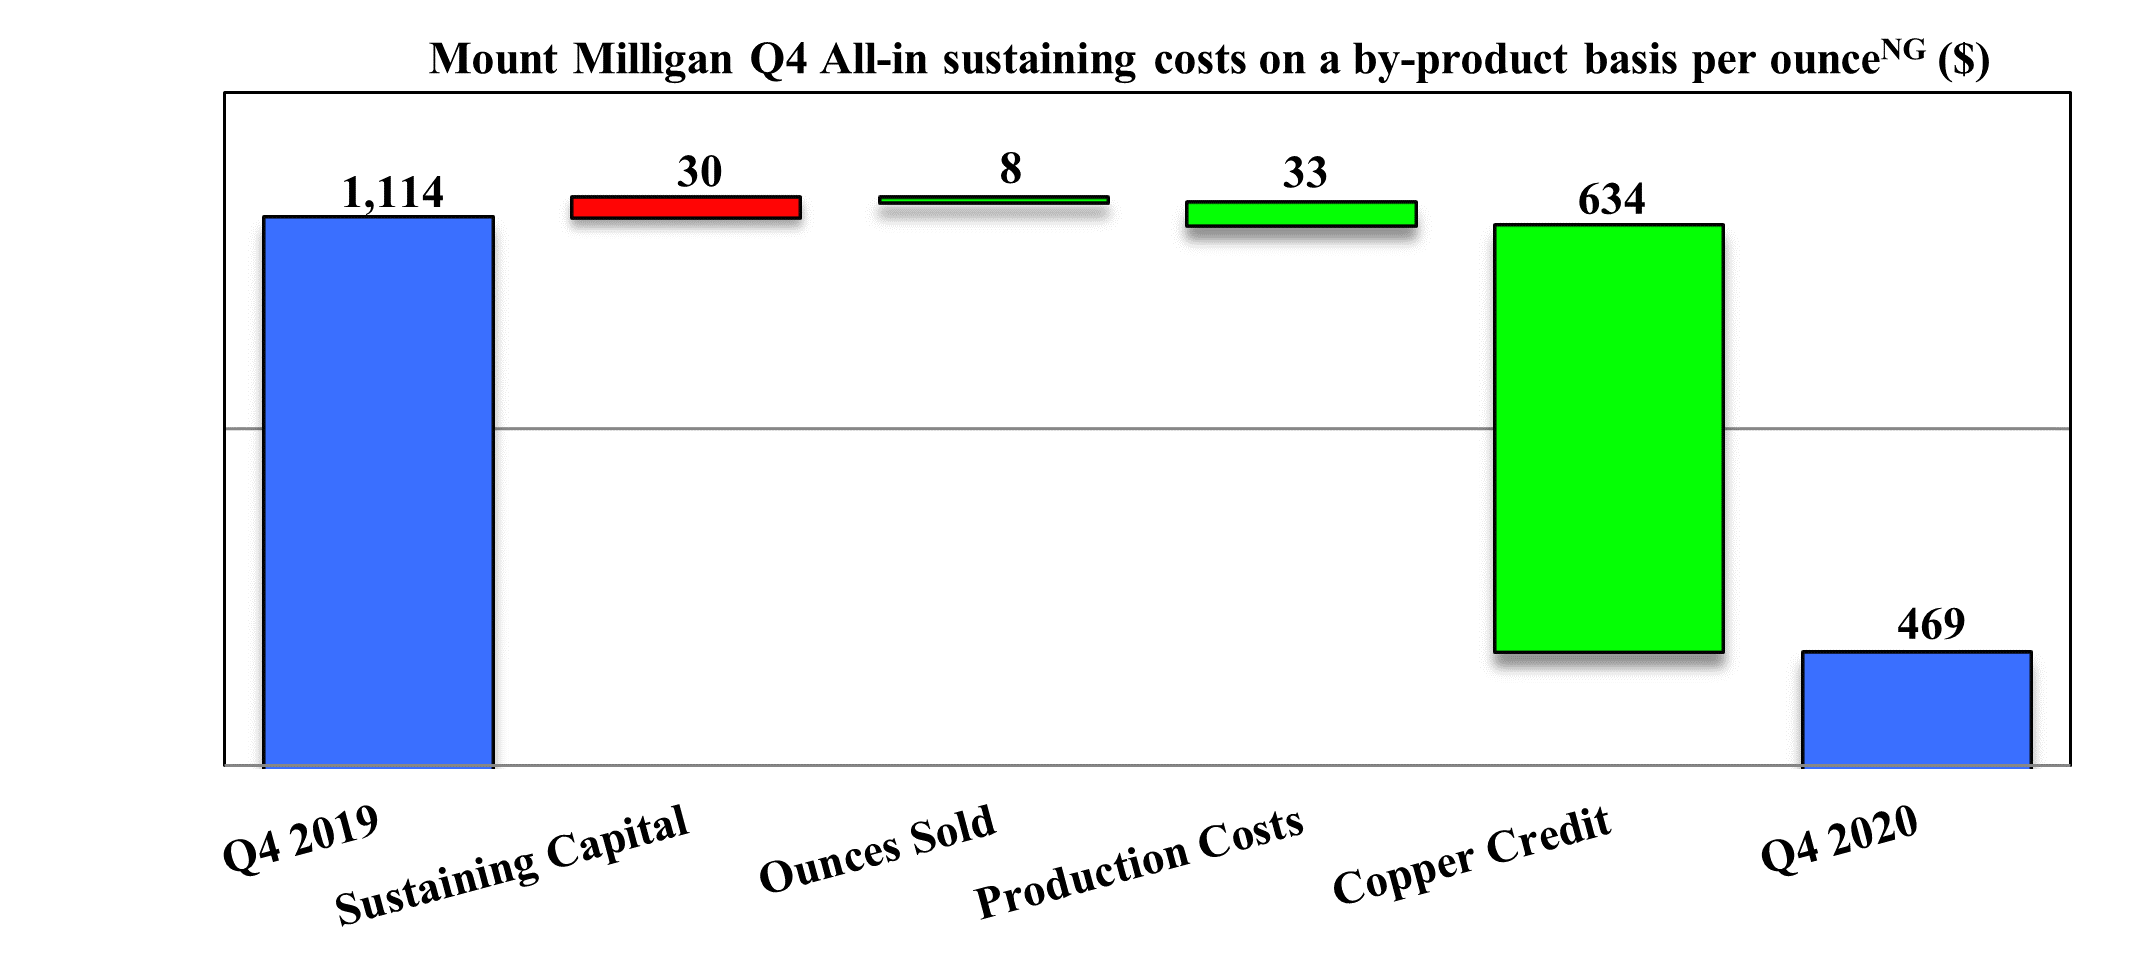 Mount Milligan Q4 All-in sustaining costs on a by-product basis per ounce (Non-GAAP) ($)